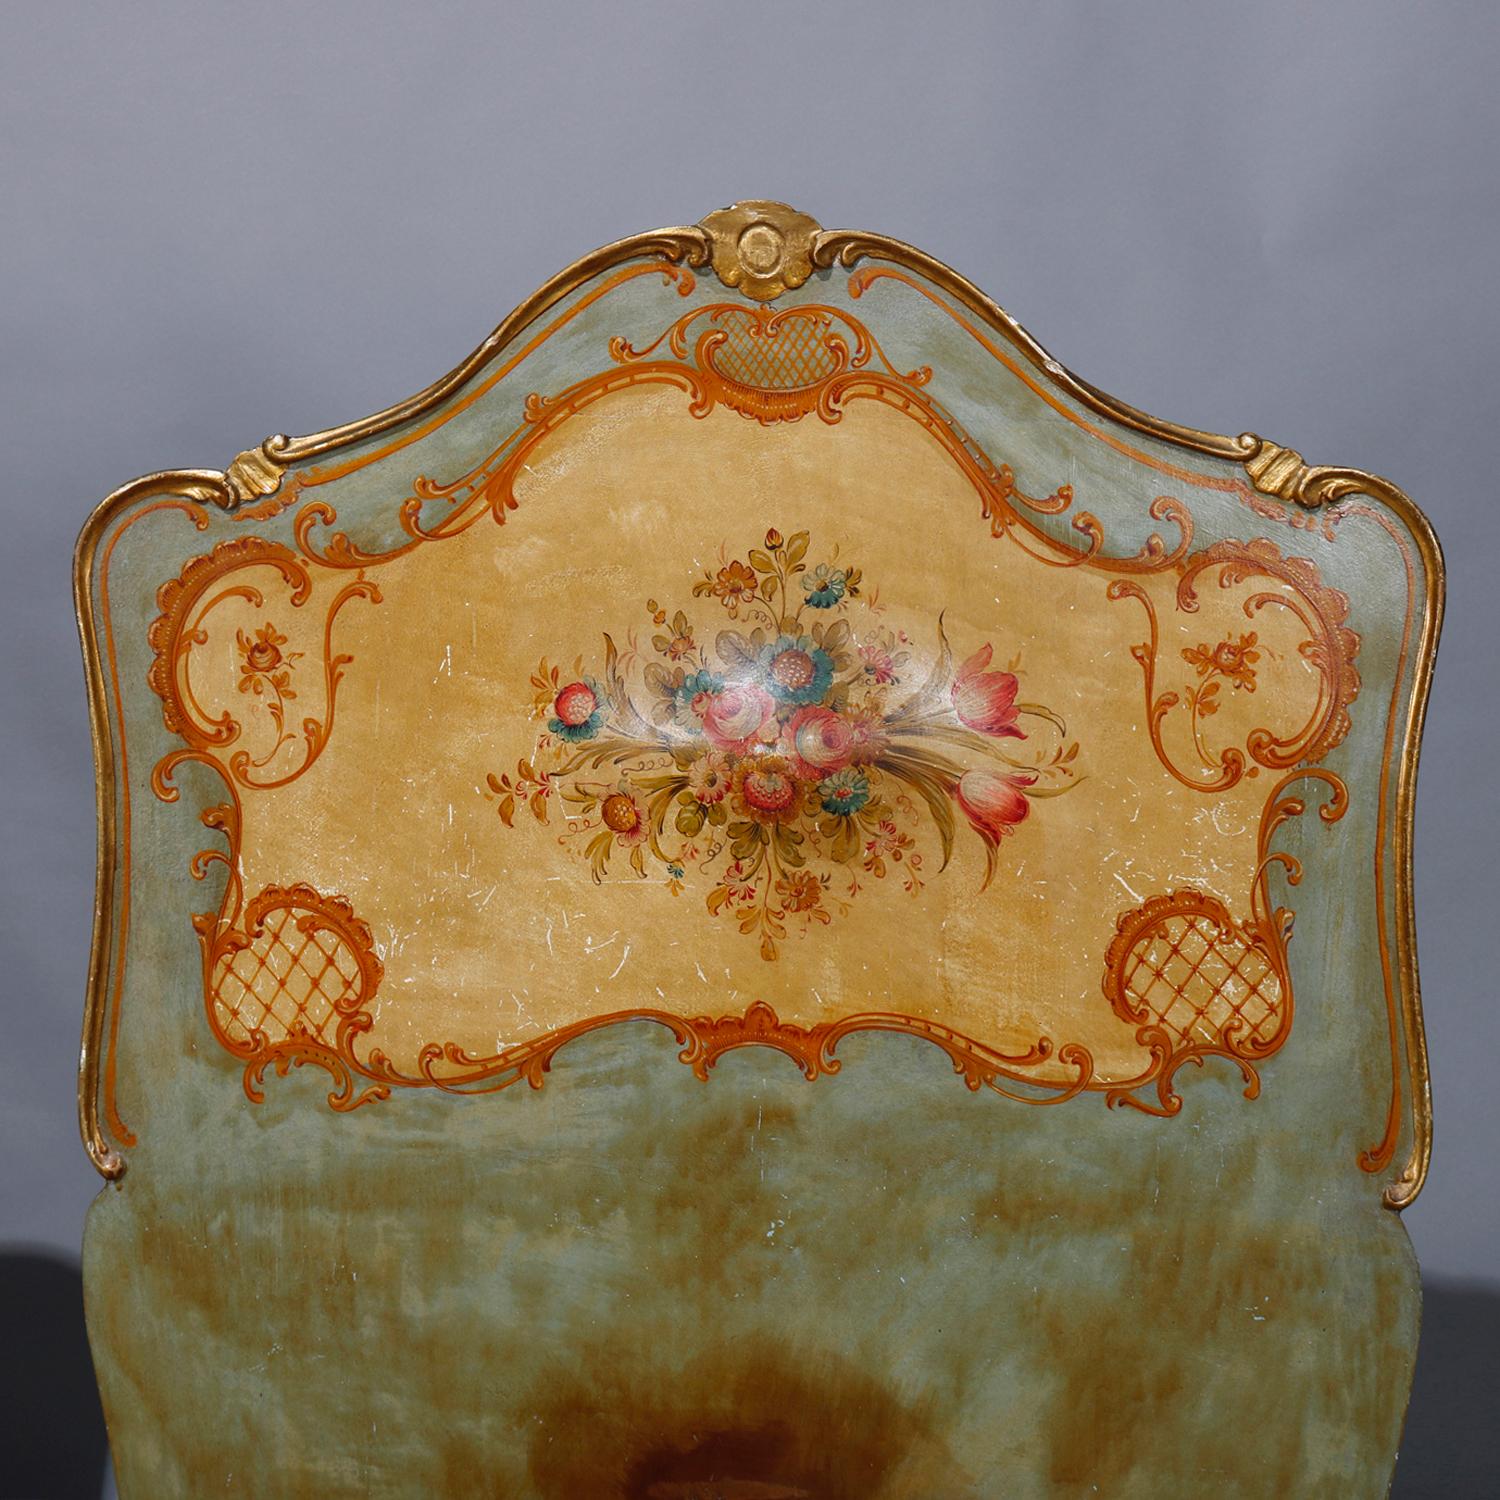 A pair of antique Italian Rococo twin bed frames offer shaped head and foot boards with central hand painted floral reserves, scroll, foliate, gadroon and gilt highlights, raised on cabriole legs, circa 1930.

Measures: fr: 52